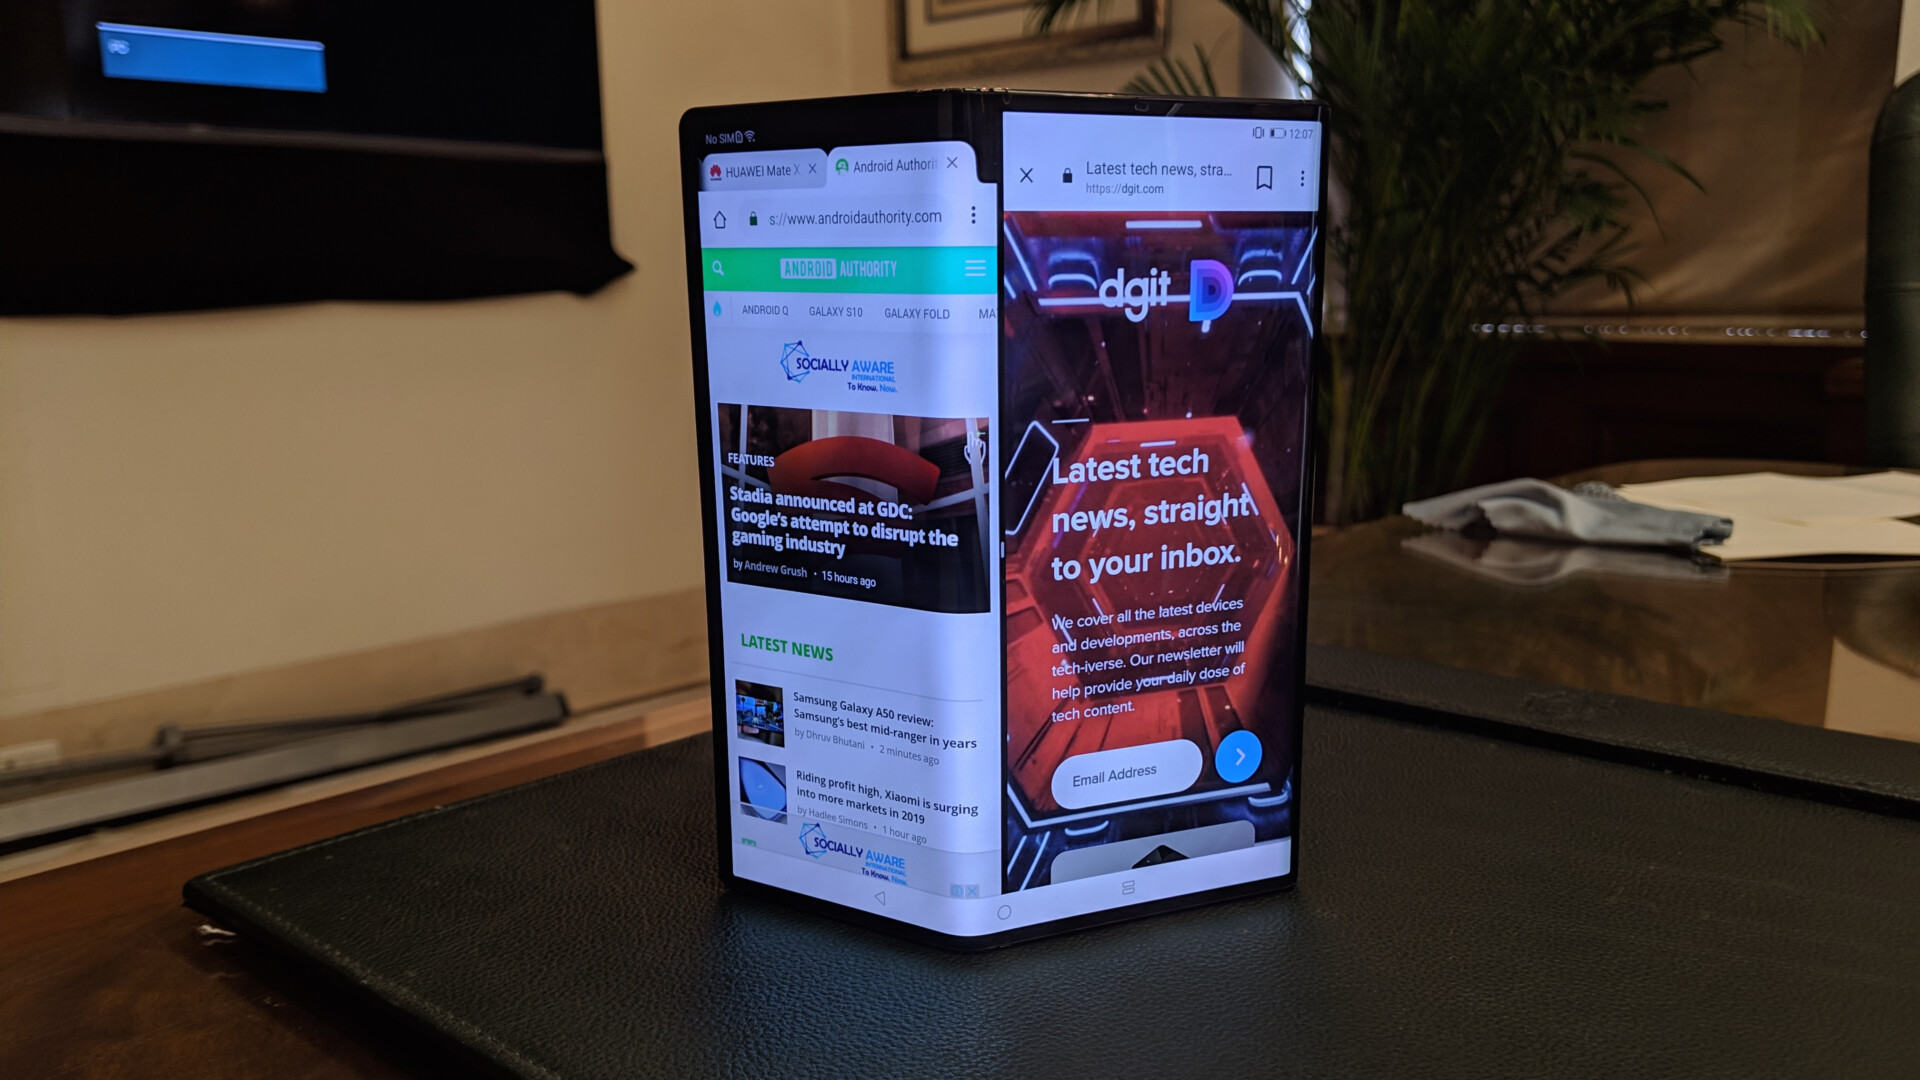 Huawei Mate X Folded Display with Dgit and Android Authority Split